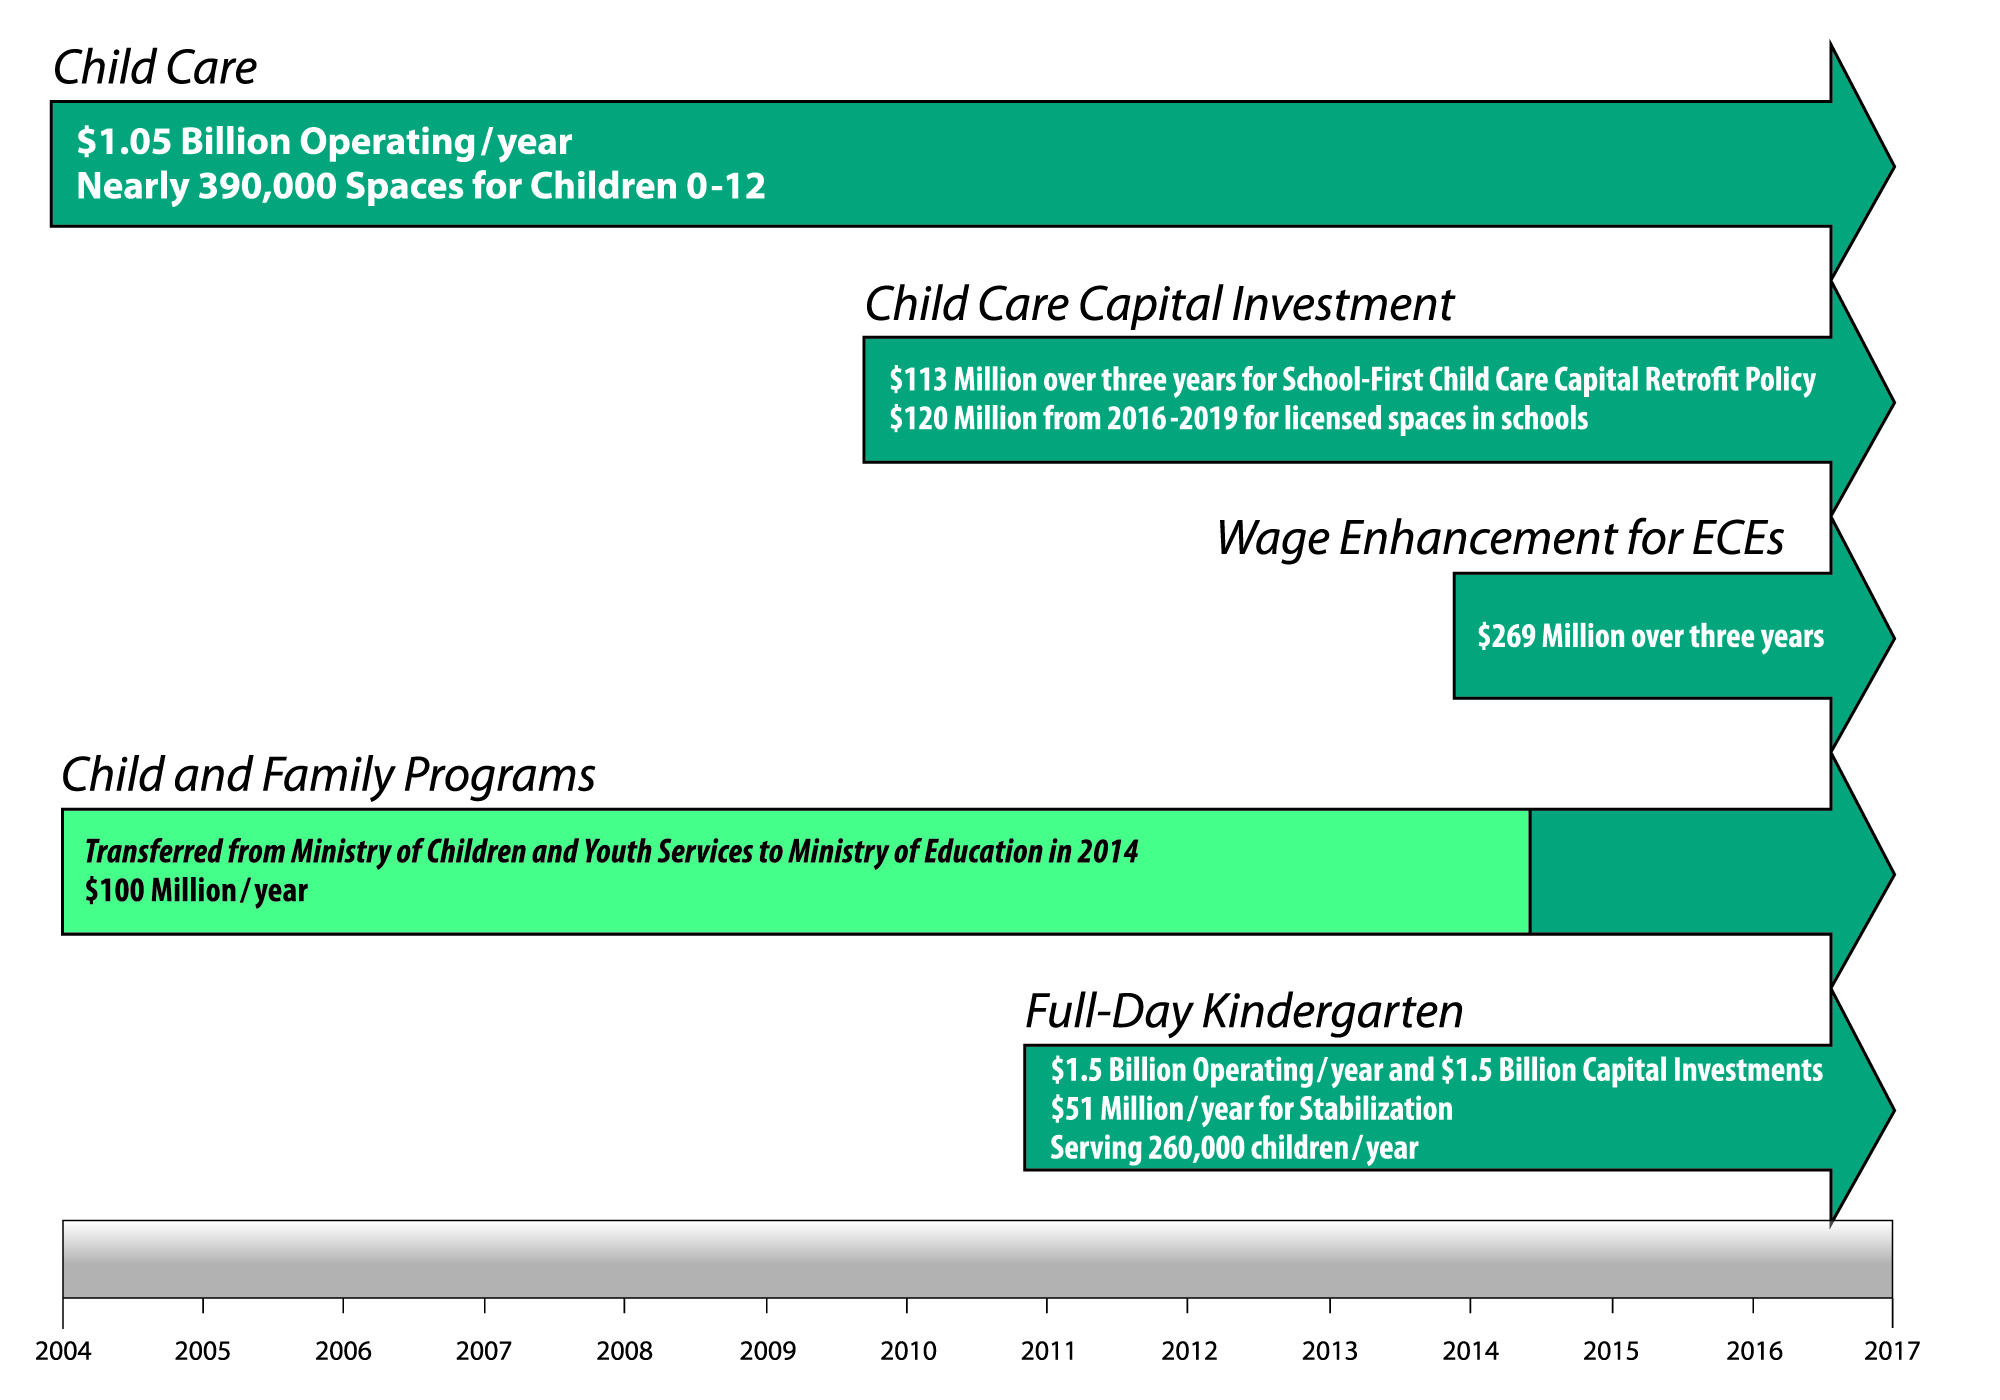 Title: Total Investments in the Early Years - Description: A chart showing the different investments Ontario has made its the early years sector, and what year they were implemented. 

First bar is child care: $1.05 Billion Operating per year. Nearly 390,000 Spaces for Children 1-12.

Second Bar: Child Care Capital Investments: $113 Million over three years for School-First Child Care Capital Retrofit Policy. $120 Million from 2016-2019 for licensed spaces in school.

Third Bar: Wage Enhancement for ECEs: $269 Million over three years.

Fourth Bar: Child and Family Programs: Transfered from Ministry of Children and Youth Services to Ministry of Education in 2014. $100 Million per year.

Fifth Bar: Full-Day Kindergarten: $1.5Billion Operating per year and $1.5Billion Capital Investments; $51Million per year for Stabilization. Serving 260,000 children per year 